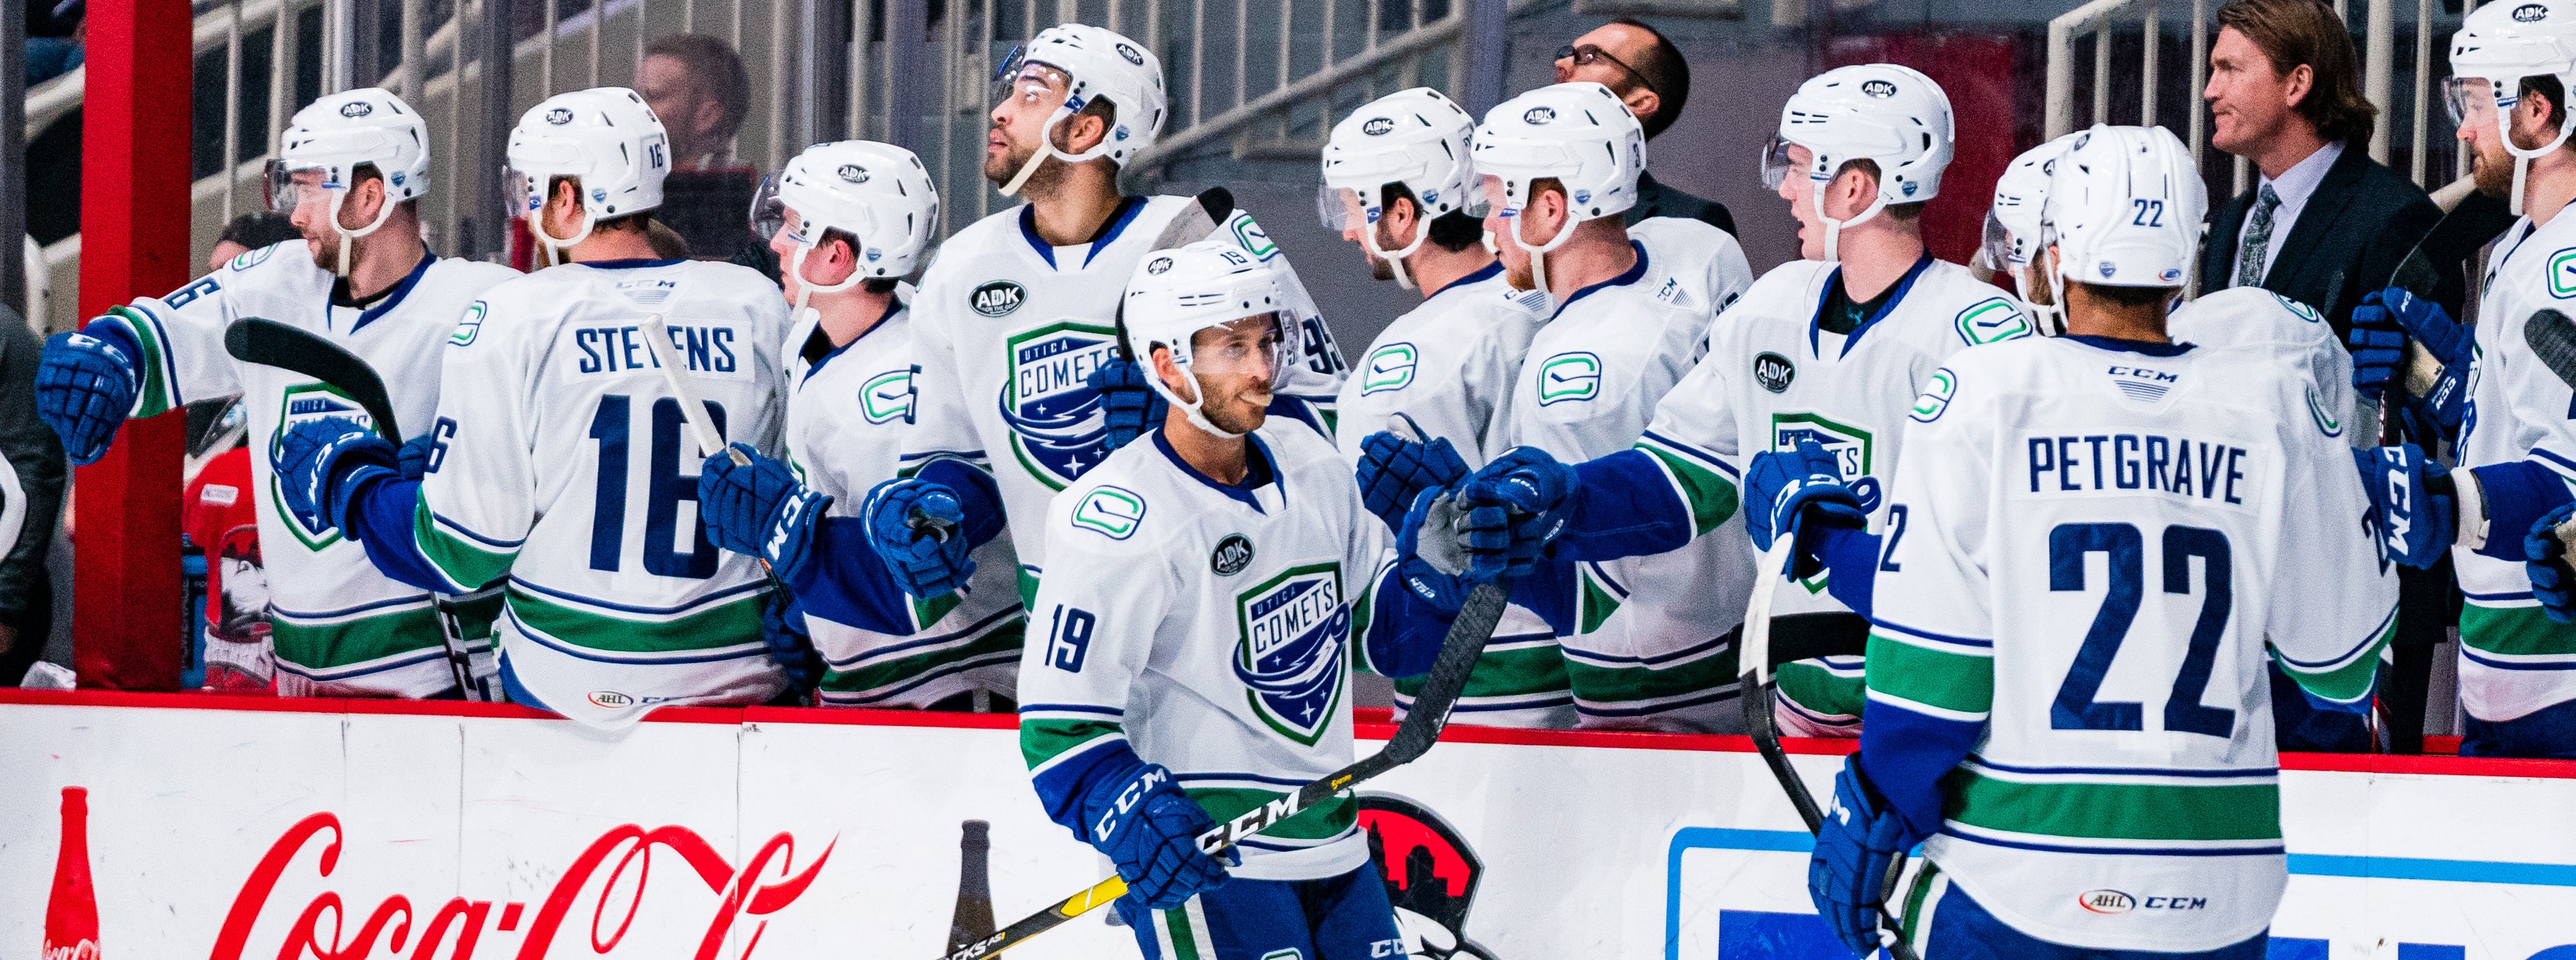 BOUCHER EARNS ANOTHER RECORD AS COMETS TOP CHECKERS